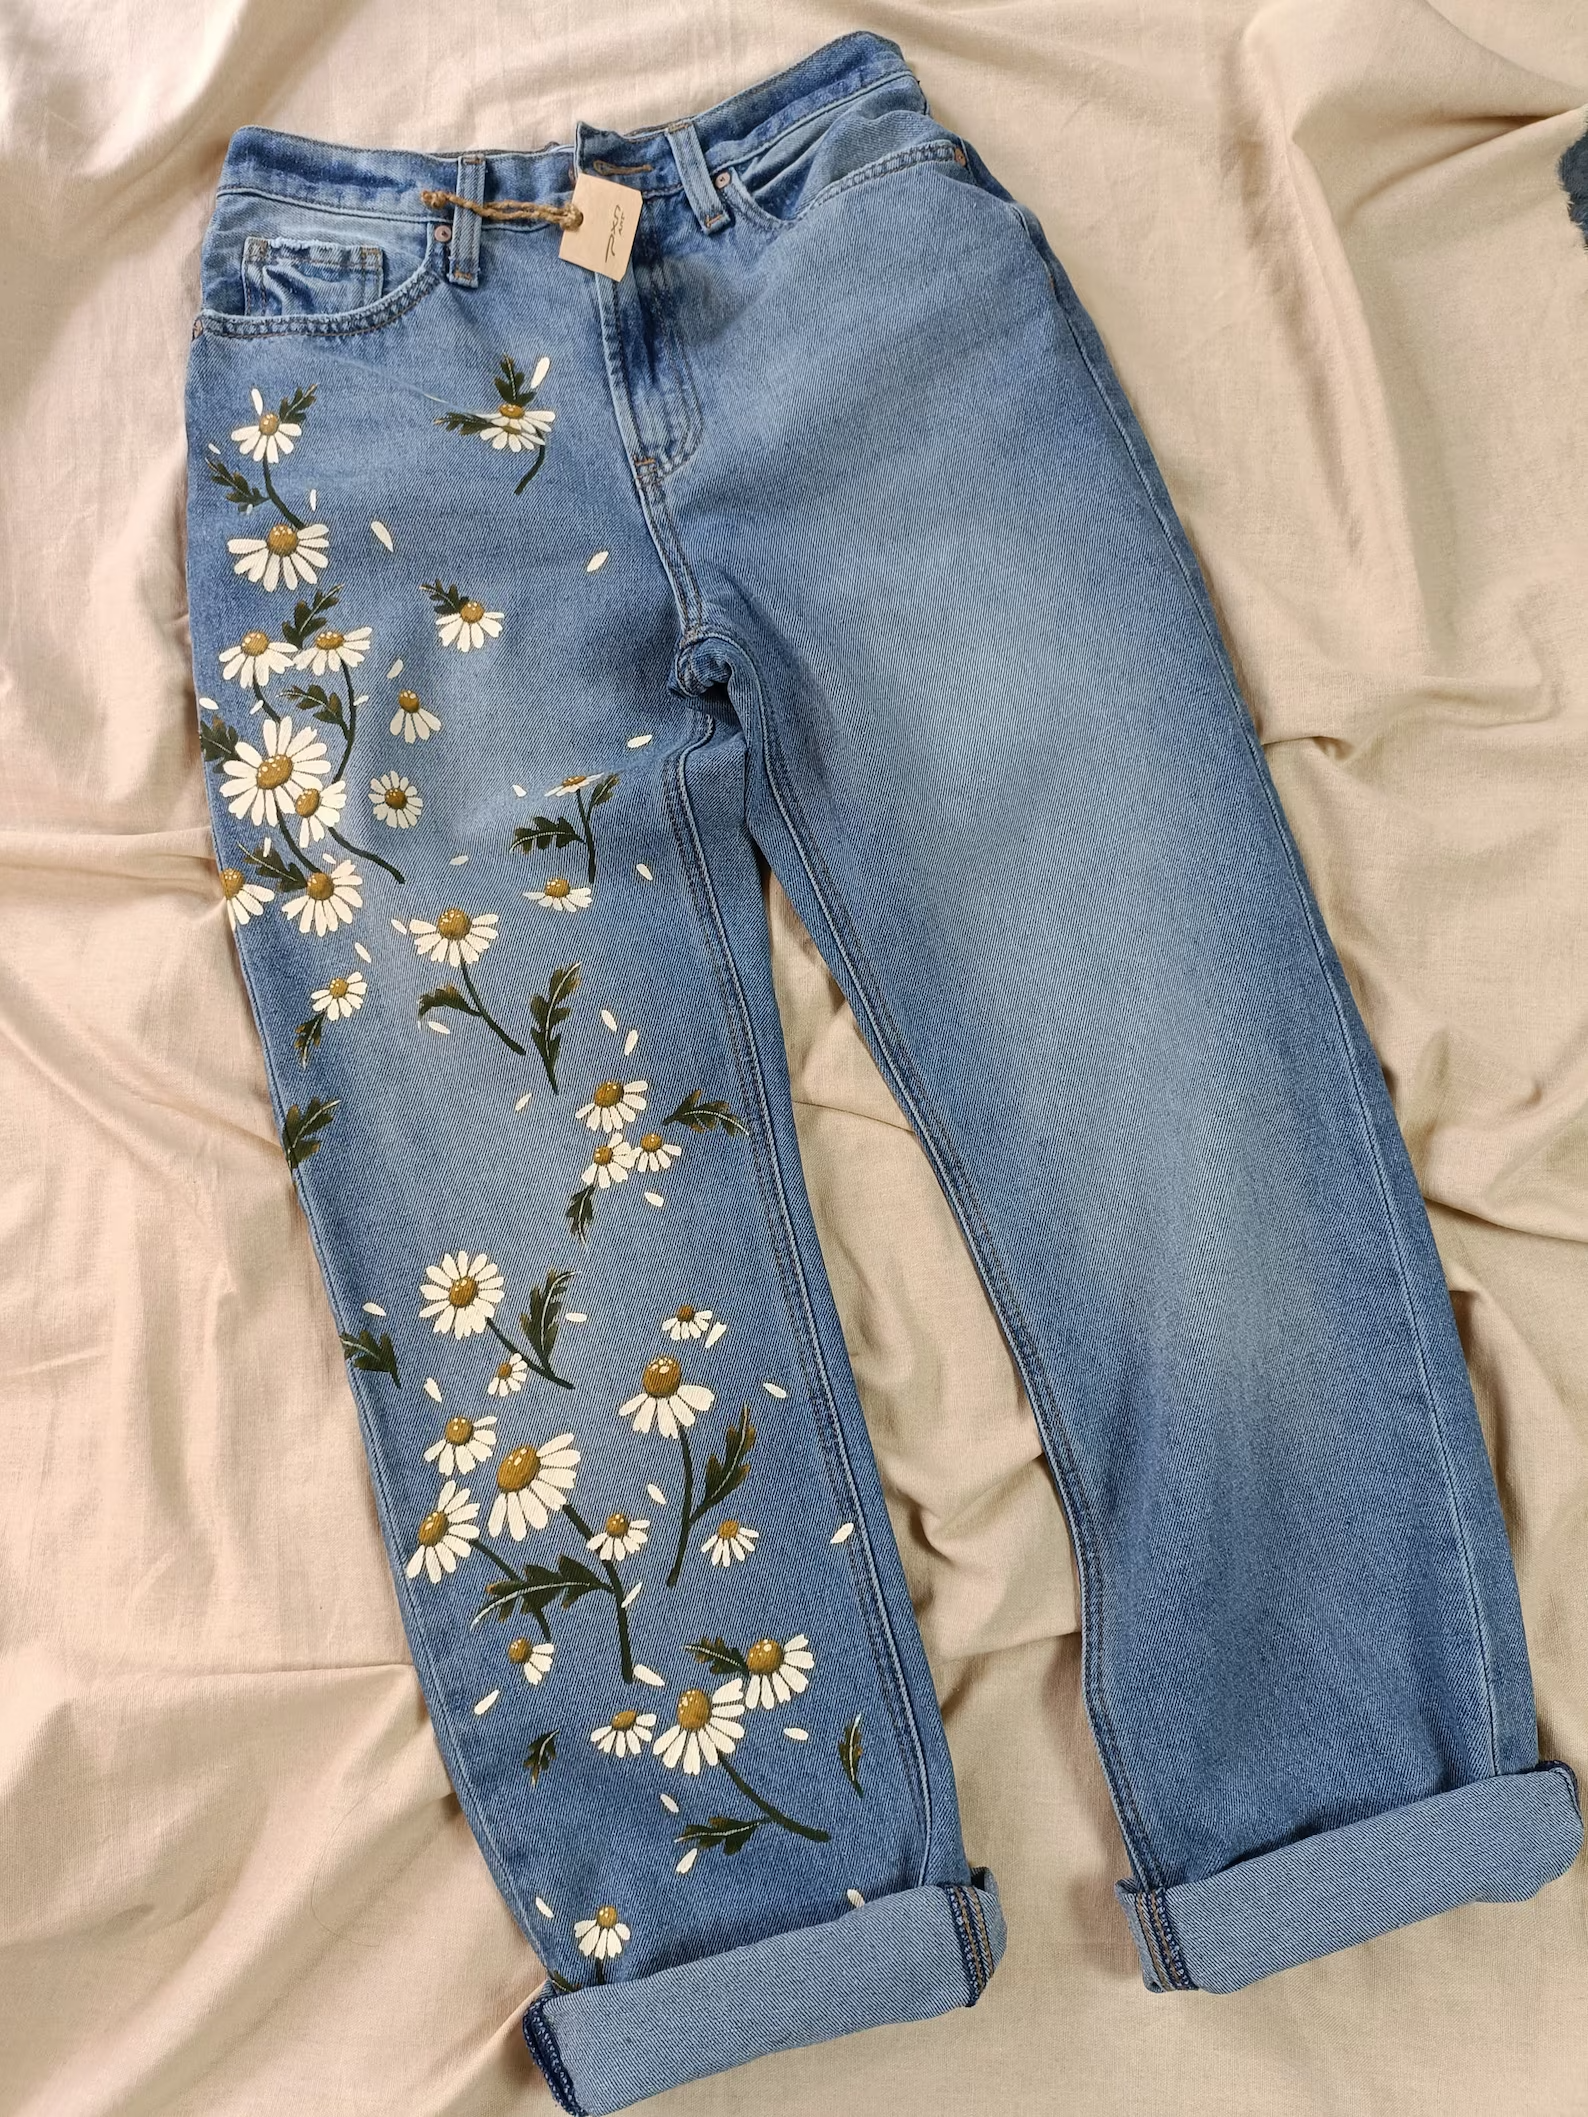 How to Style Painted Jeans: Best 10 Beautiful & Unique Outfit Ideas for Women